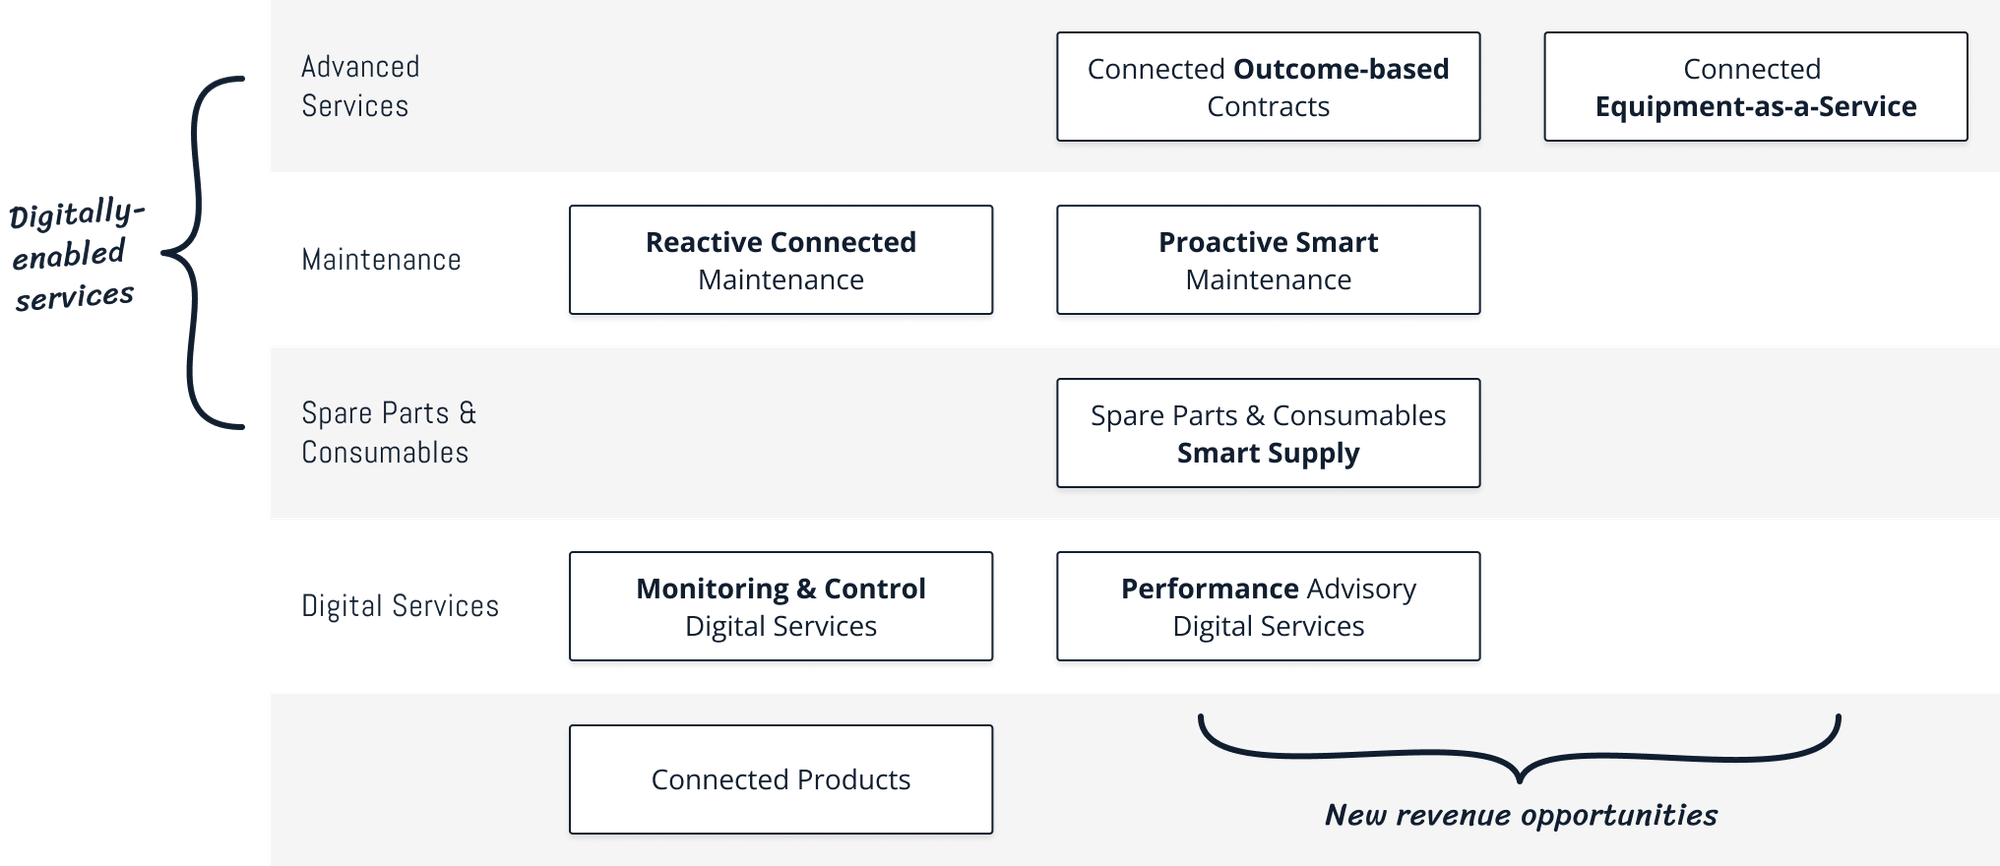 Elements making up a Connected Services offering and different groups: Digital services, Digitally-enabled services, Services giving new revenue opportunities.